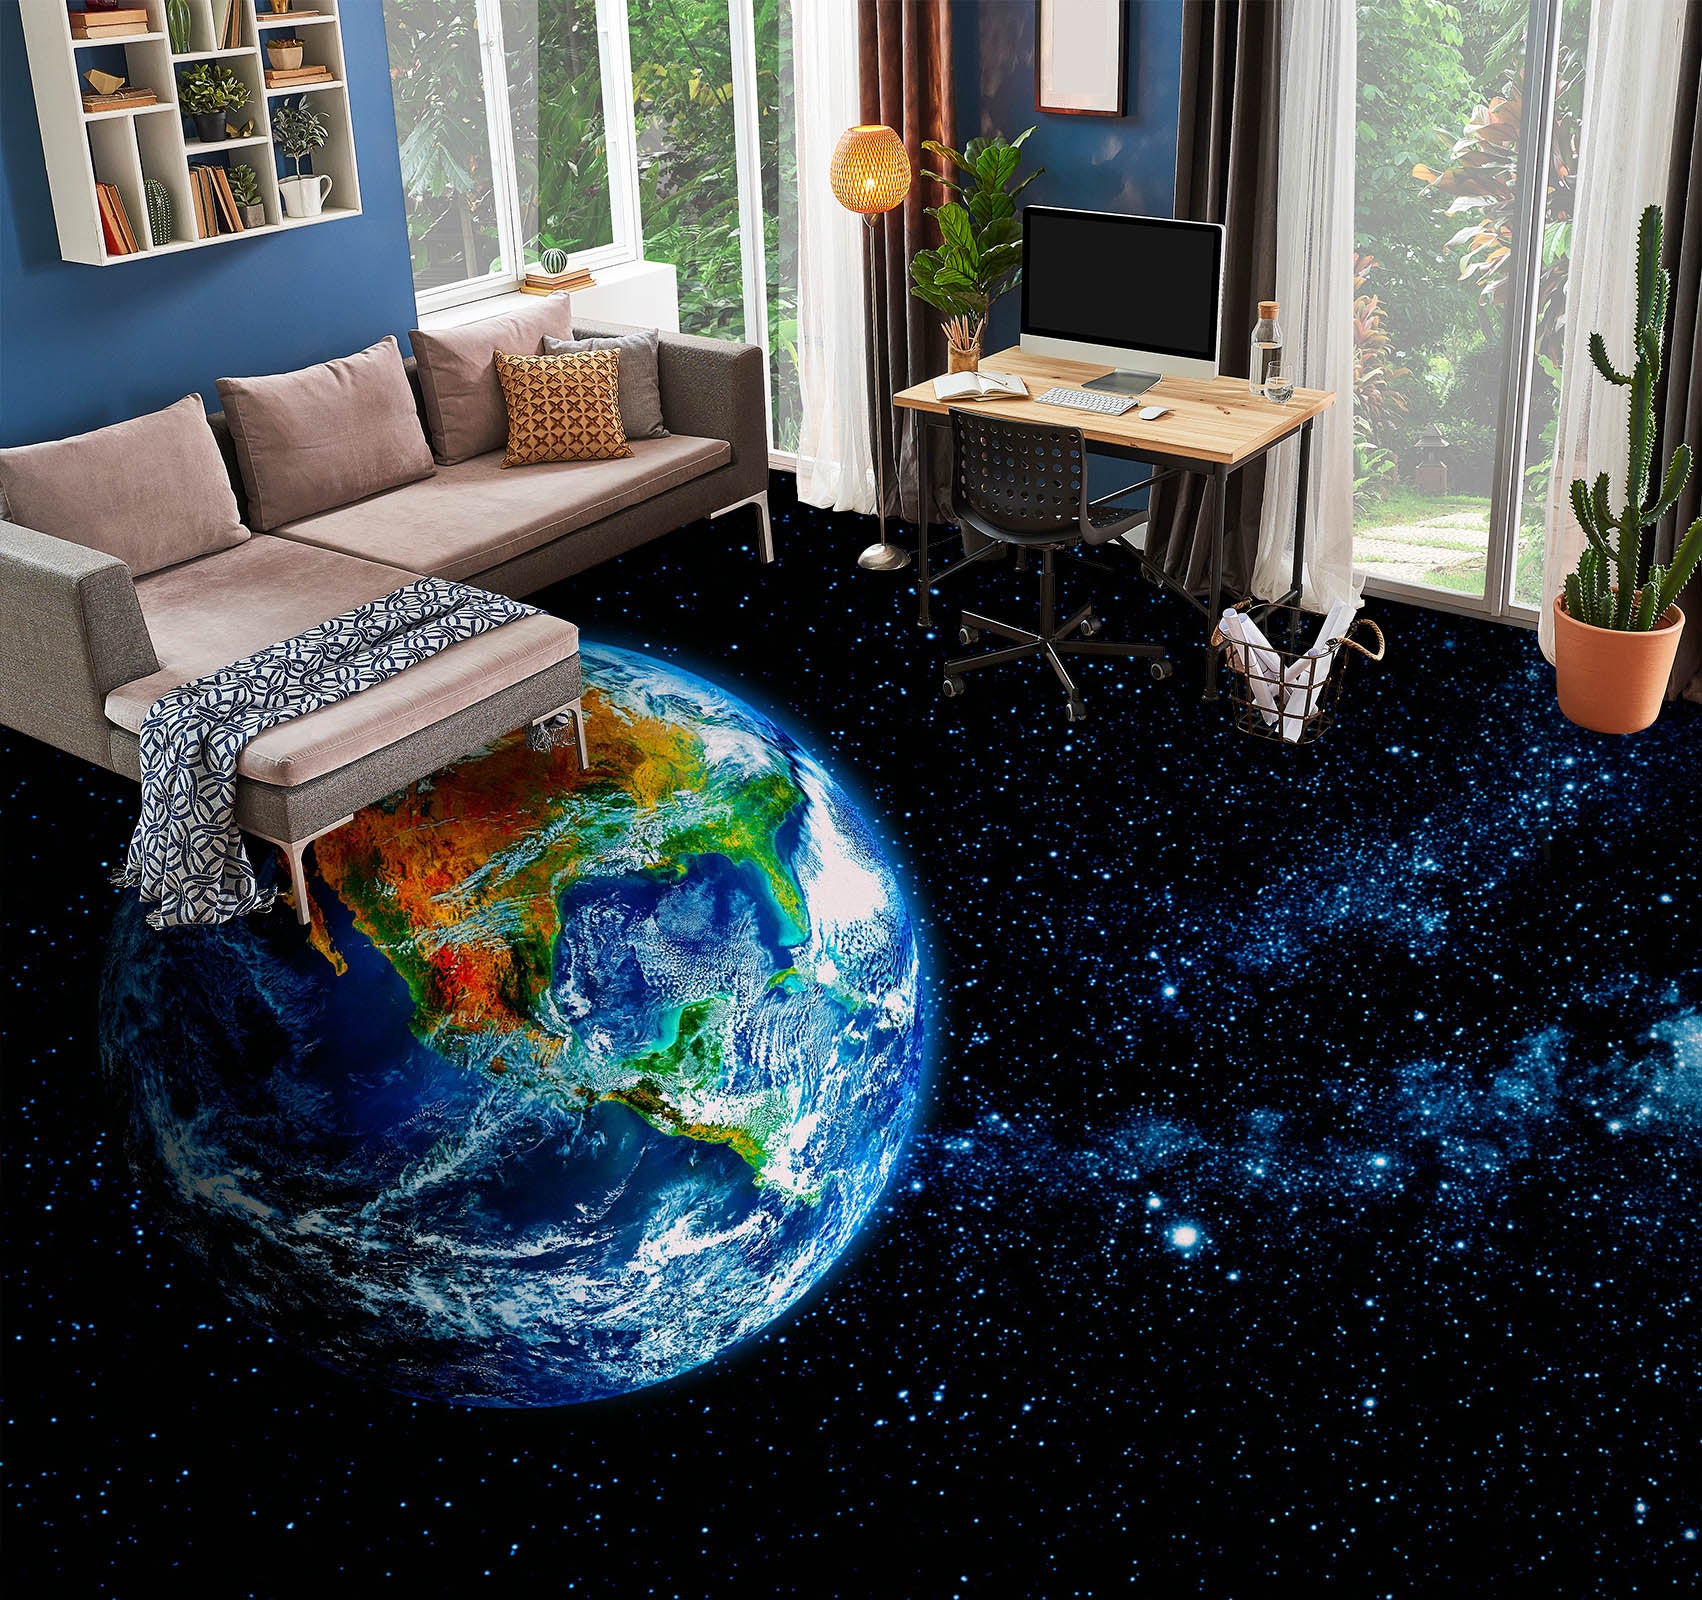 3D Mysterious Earth 1217 Floor Mural  Wallpaper Murals Self-Adhesive Removable Print Epoxy